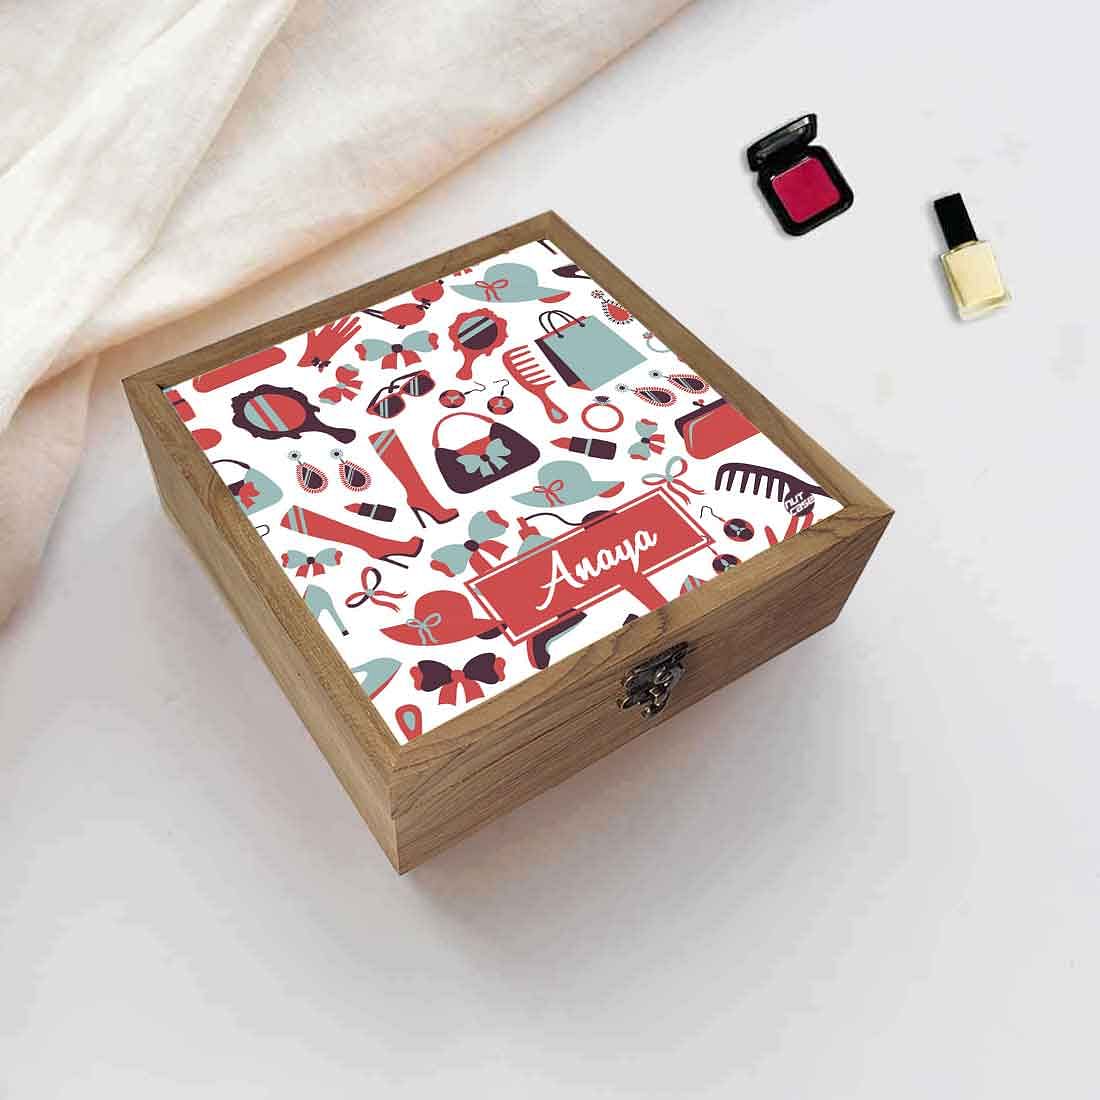 Personalized Cute Jewelry Boxes for Kids - Girls Fashion Nutcase